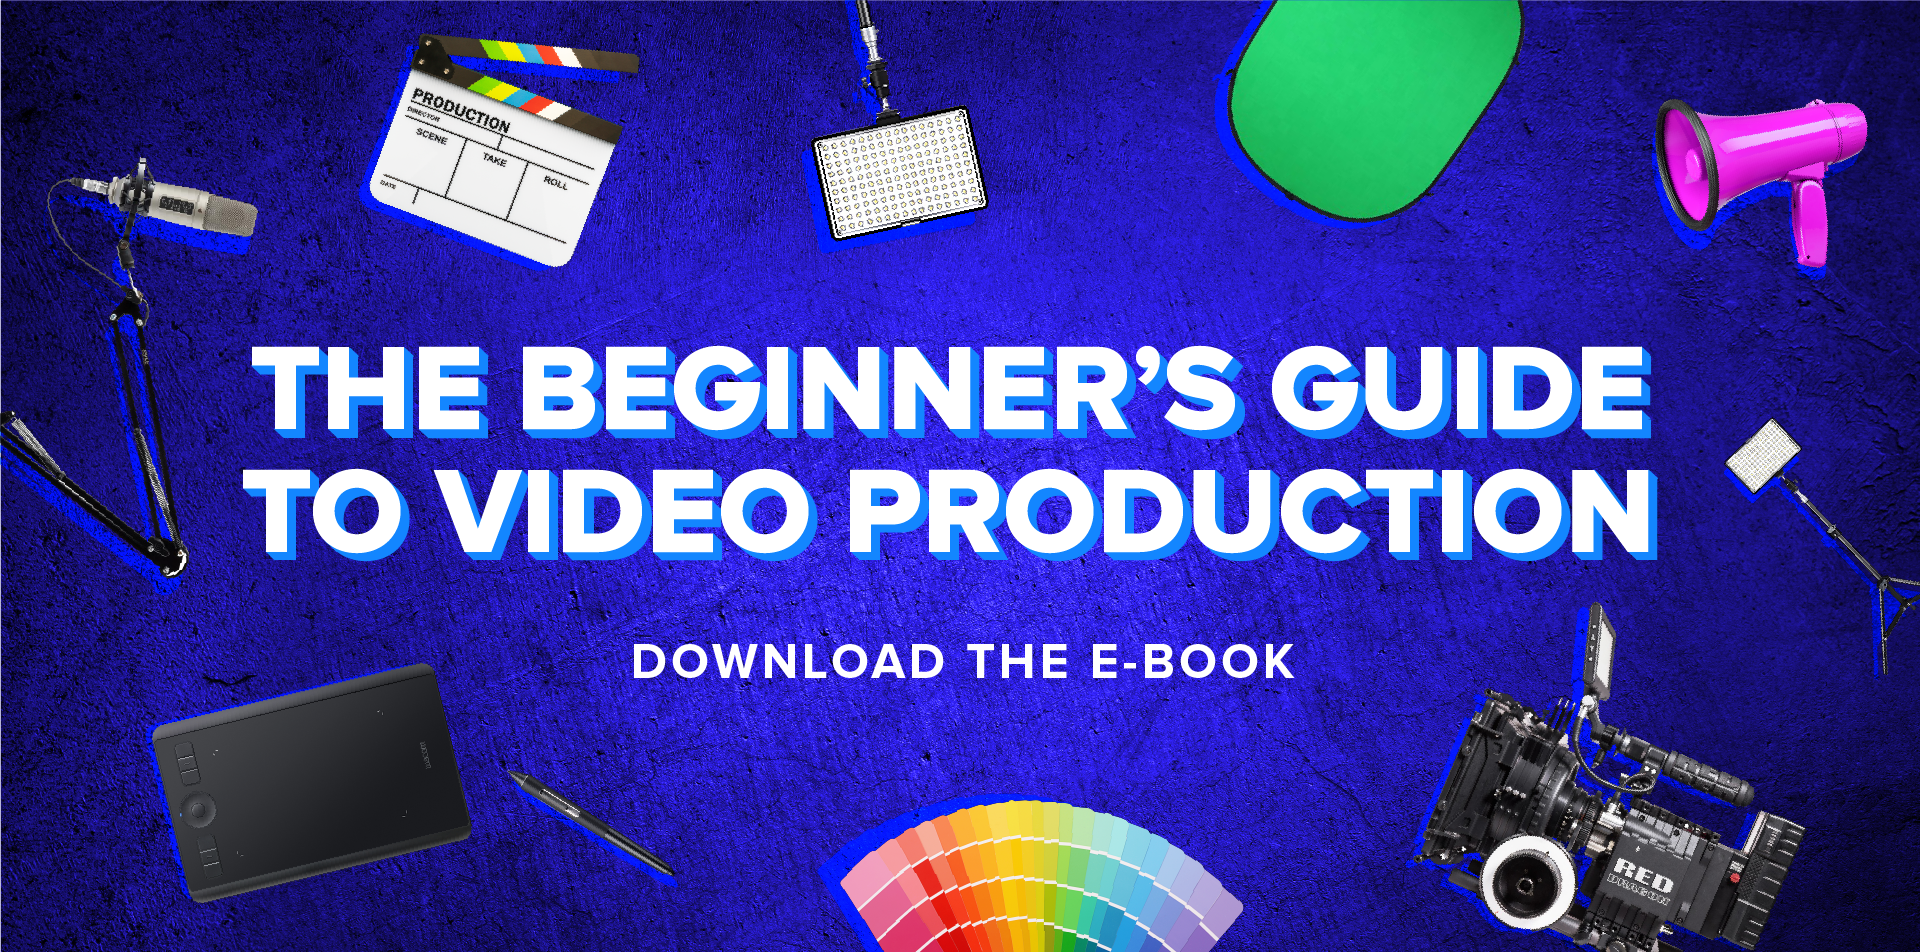 The Beginner's Guide to Video Production download the eBook